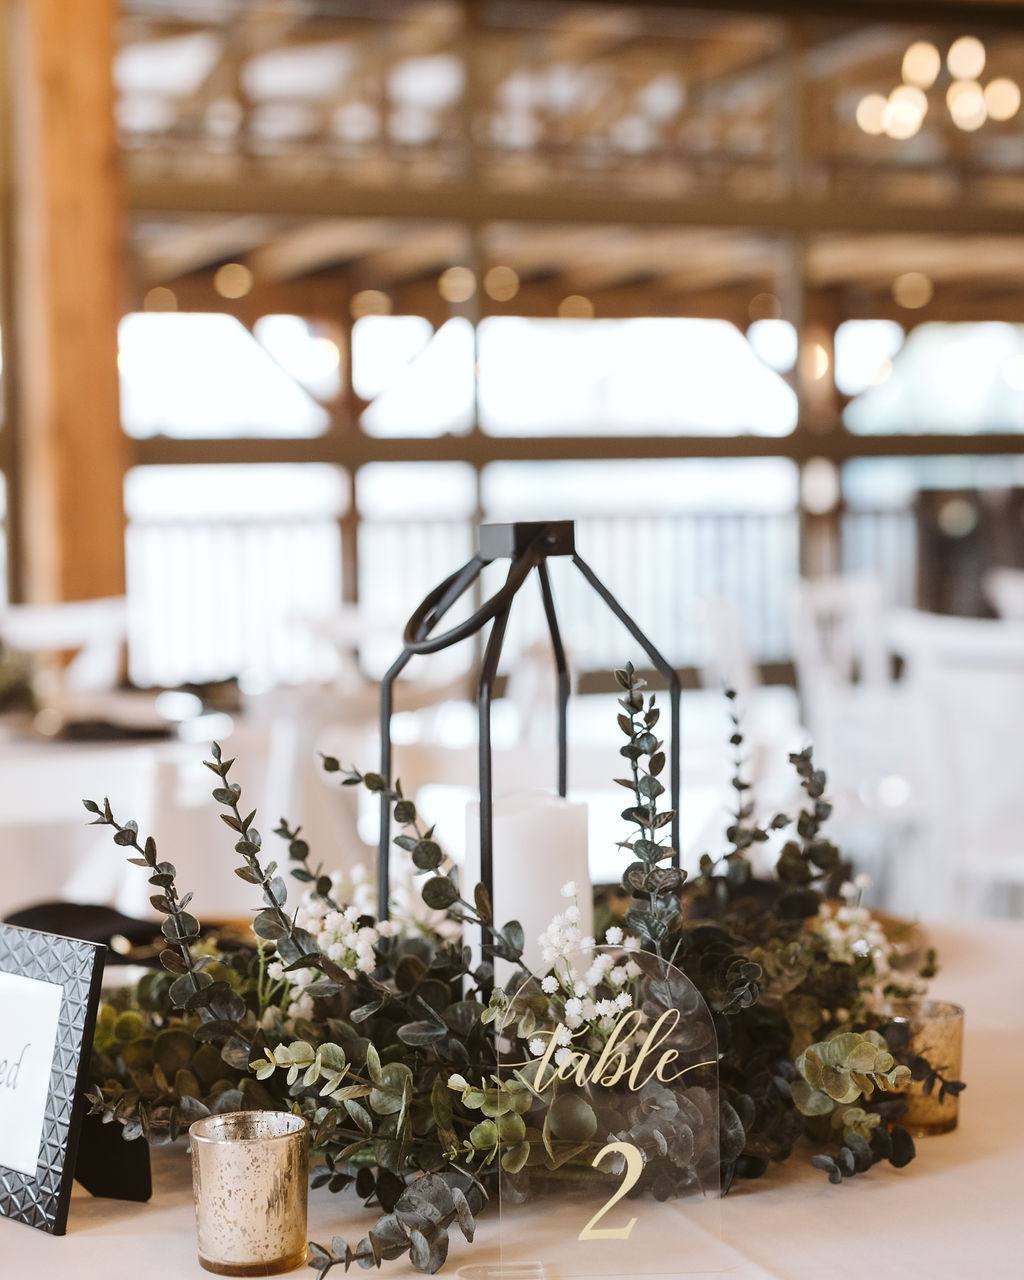 How about some wedding decor inspo? 💍✨

Haue Valley has over 3000+ pieces of trendy decor for couples to use for free.👇
❤️ Centerpieces &amp; table decor
❤️ Florals &amp; Garlands
❤️ Table Numbers
❤️ Ceremony Arbors
❤️ Chargers
❤️ and much more

Wi